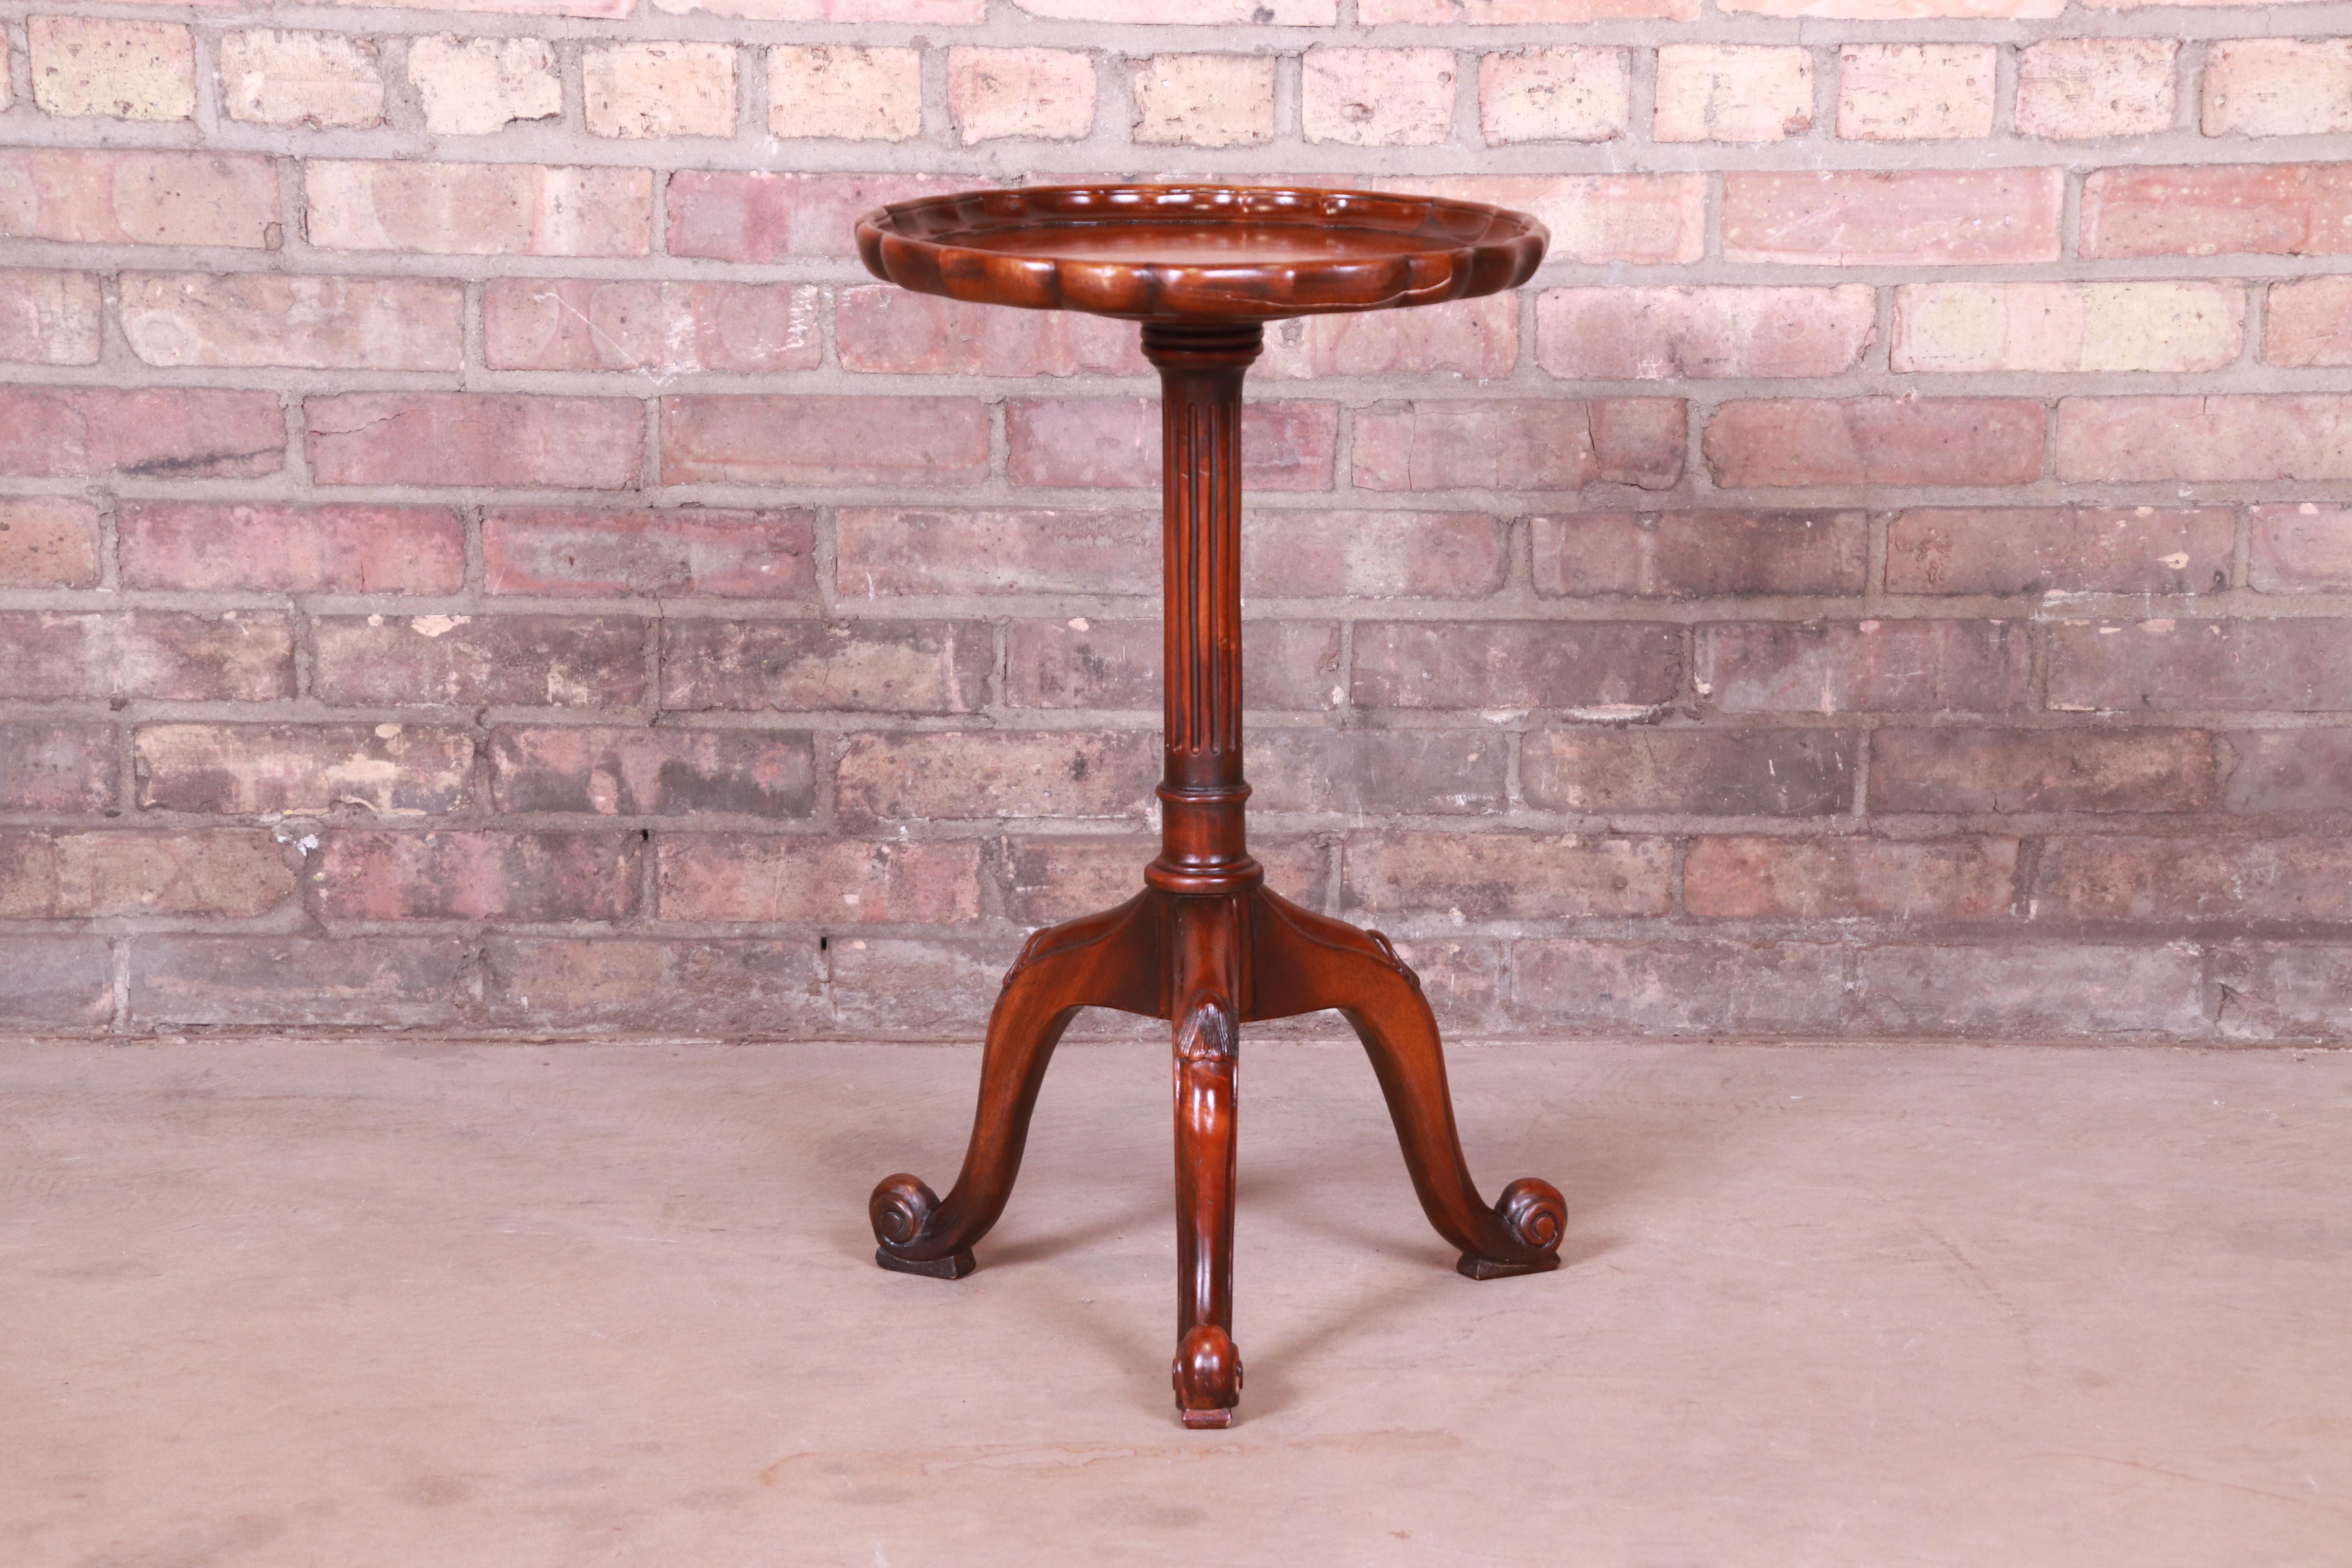 A gorgeous carved mahogany pedestal side table or plant Stand

In the style of Maitland Smith,

late 20th century

Measures: 14